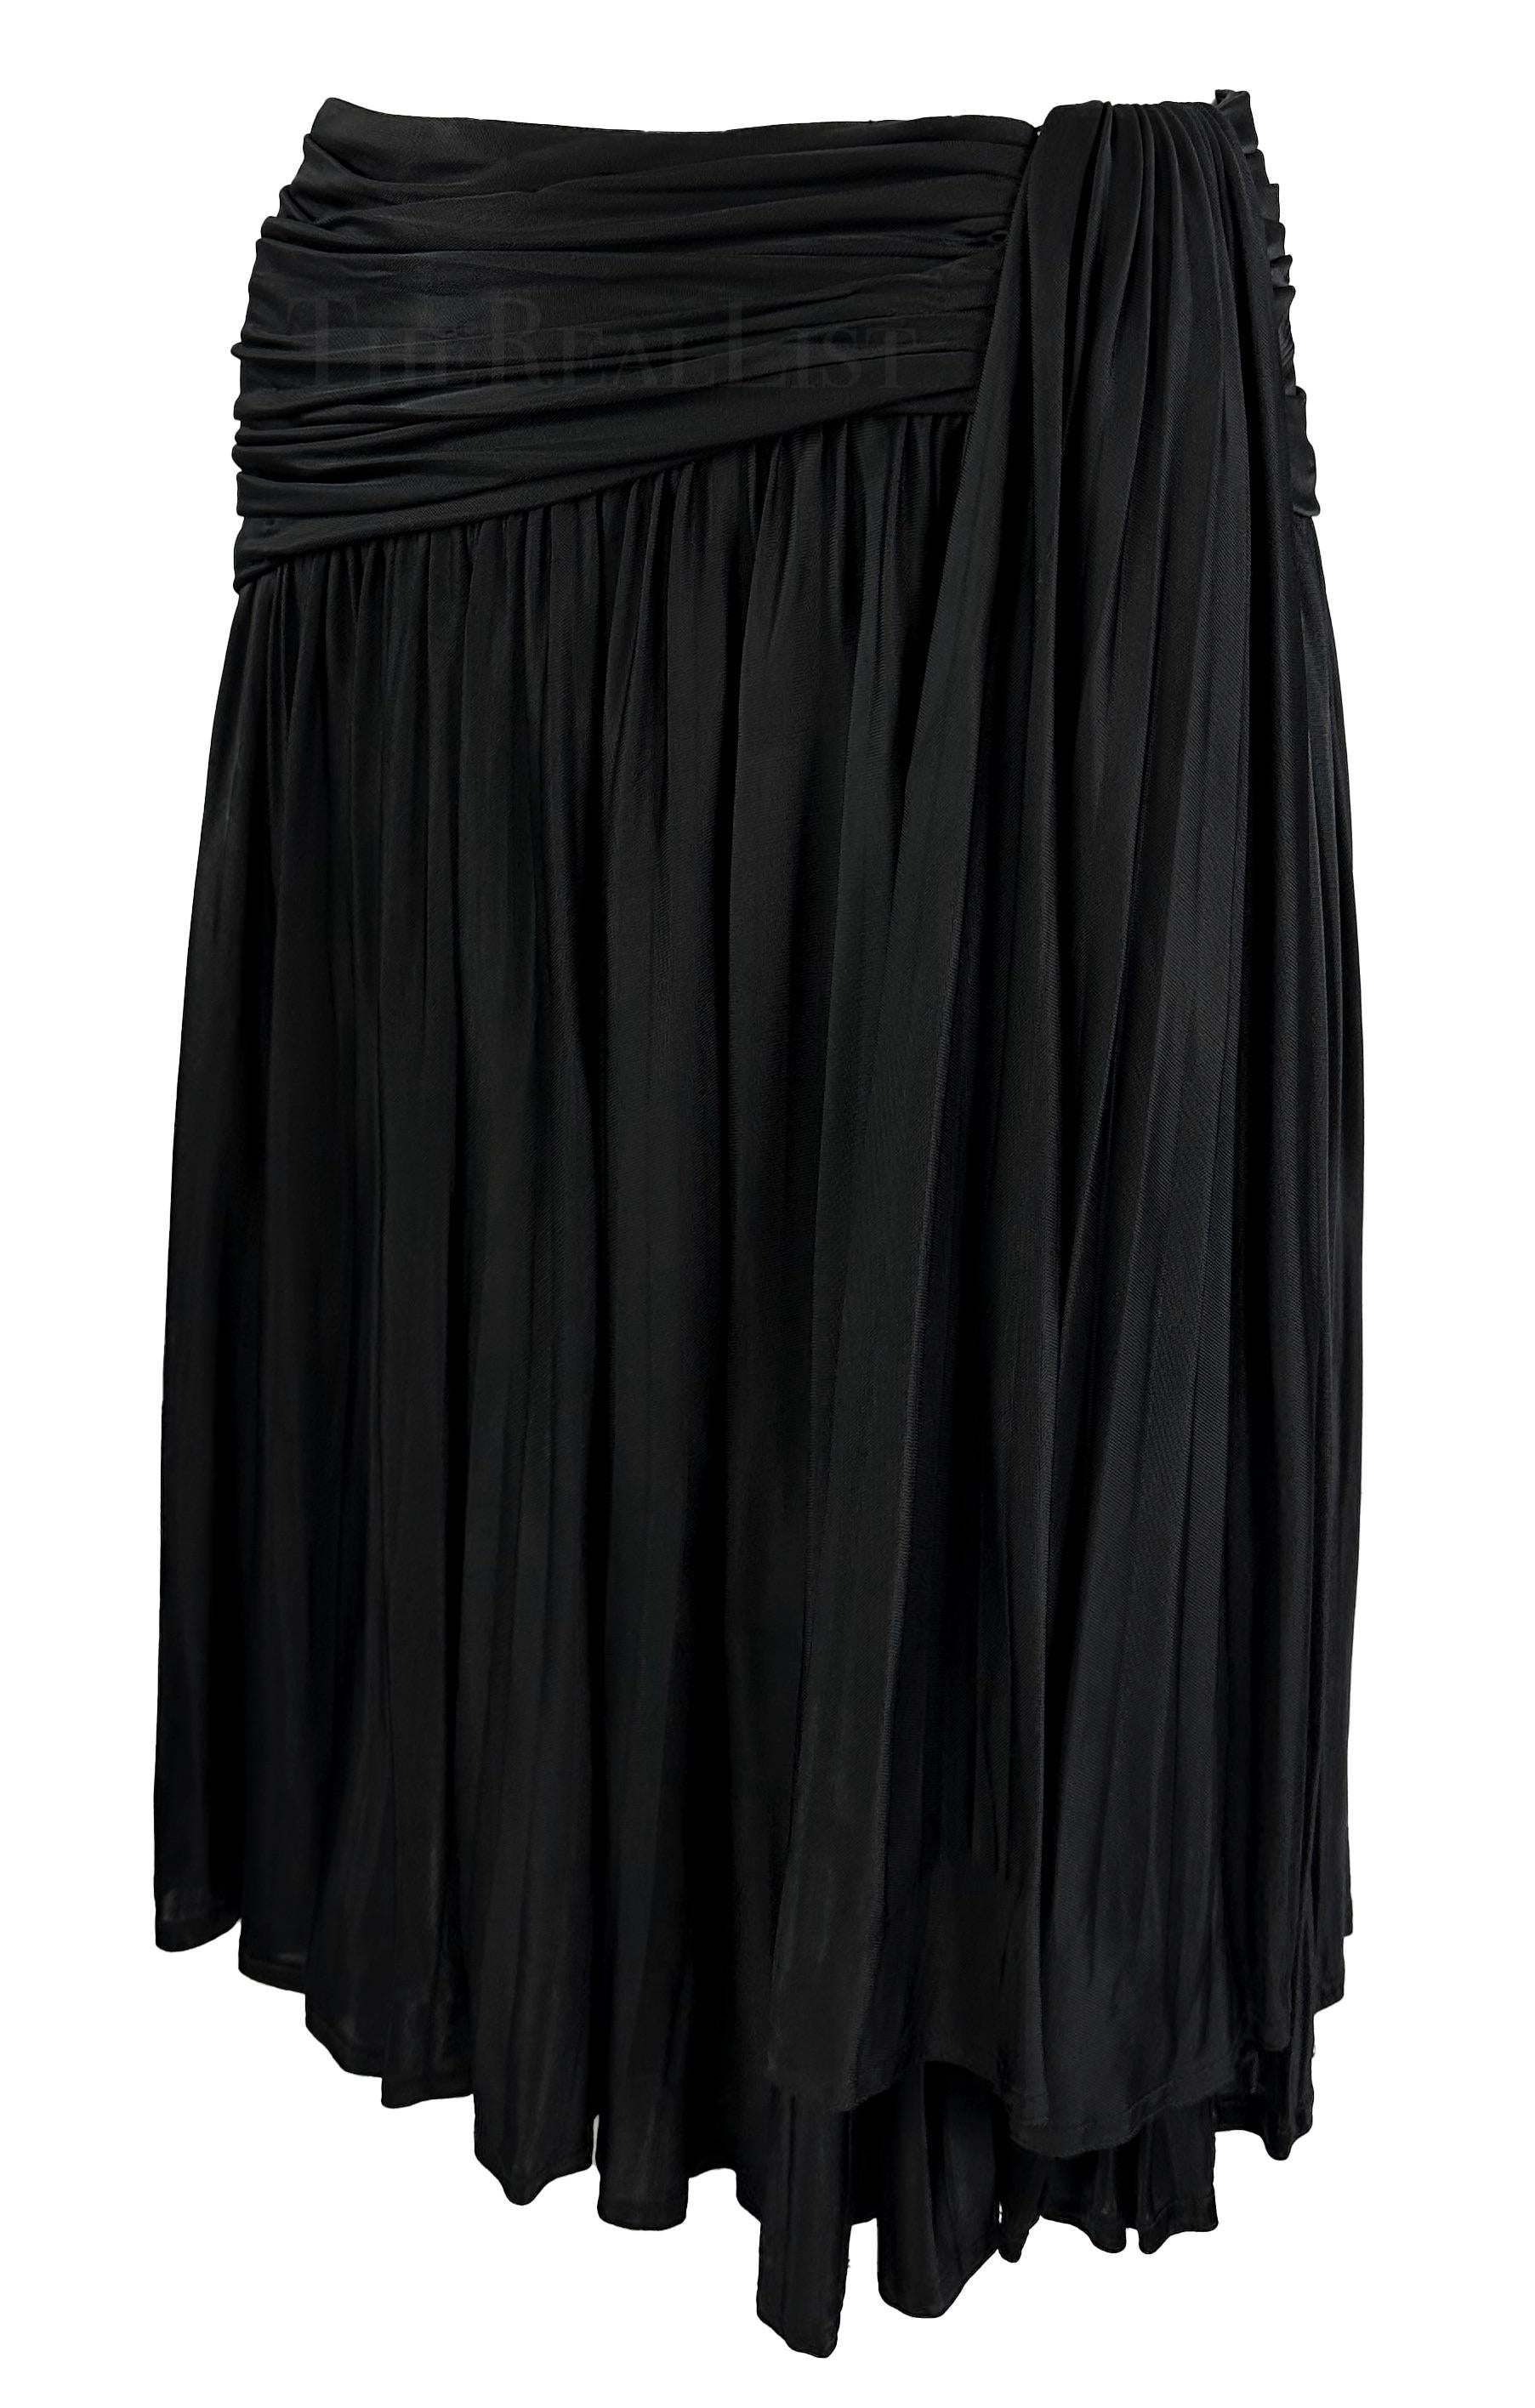 This black pleated Gianni Versace wrap-style skirt was designed by Gianni Versace for his Spring/Summer 1995 collection. This pleated flare skirt is made complete with an asymmetrical wrap design at the waist. 

Approximate measurements:
Size -